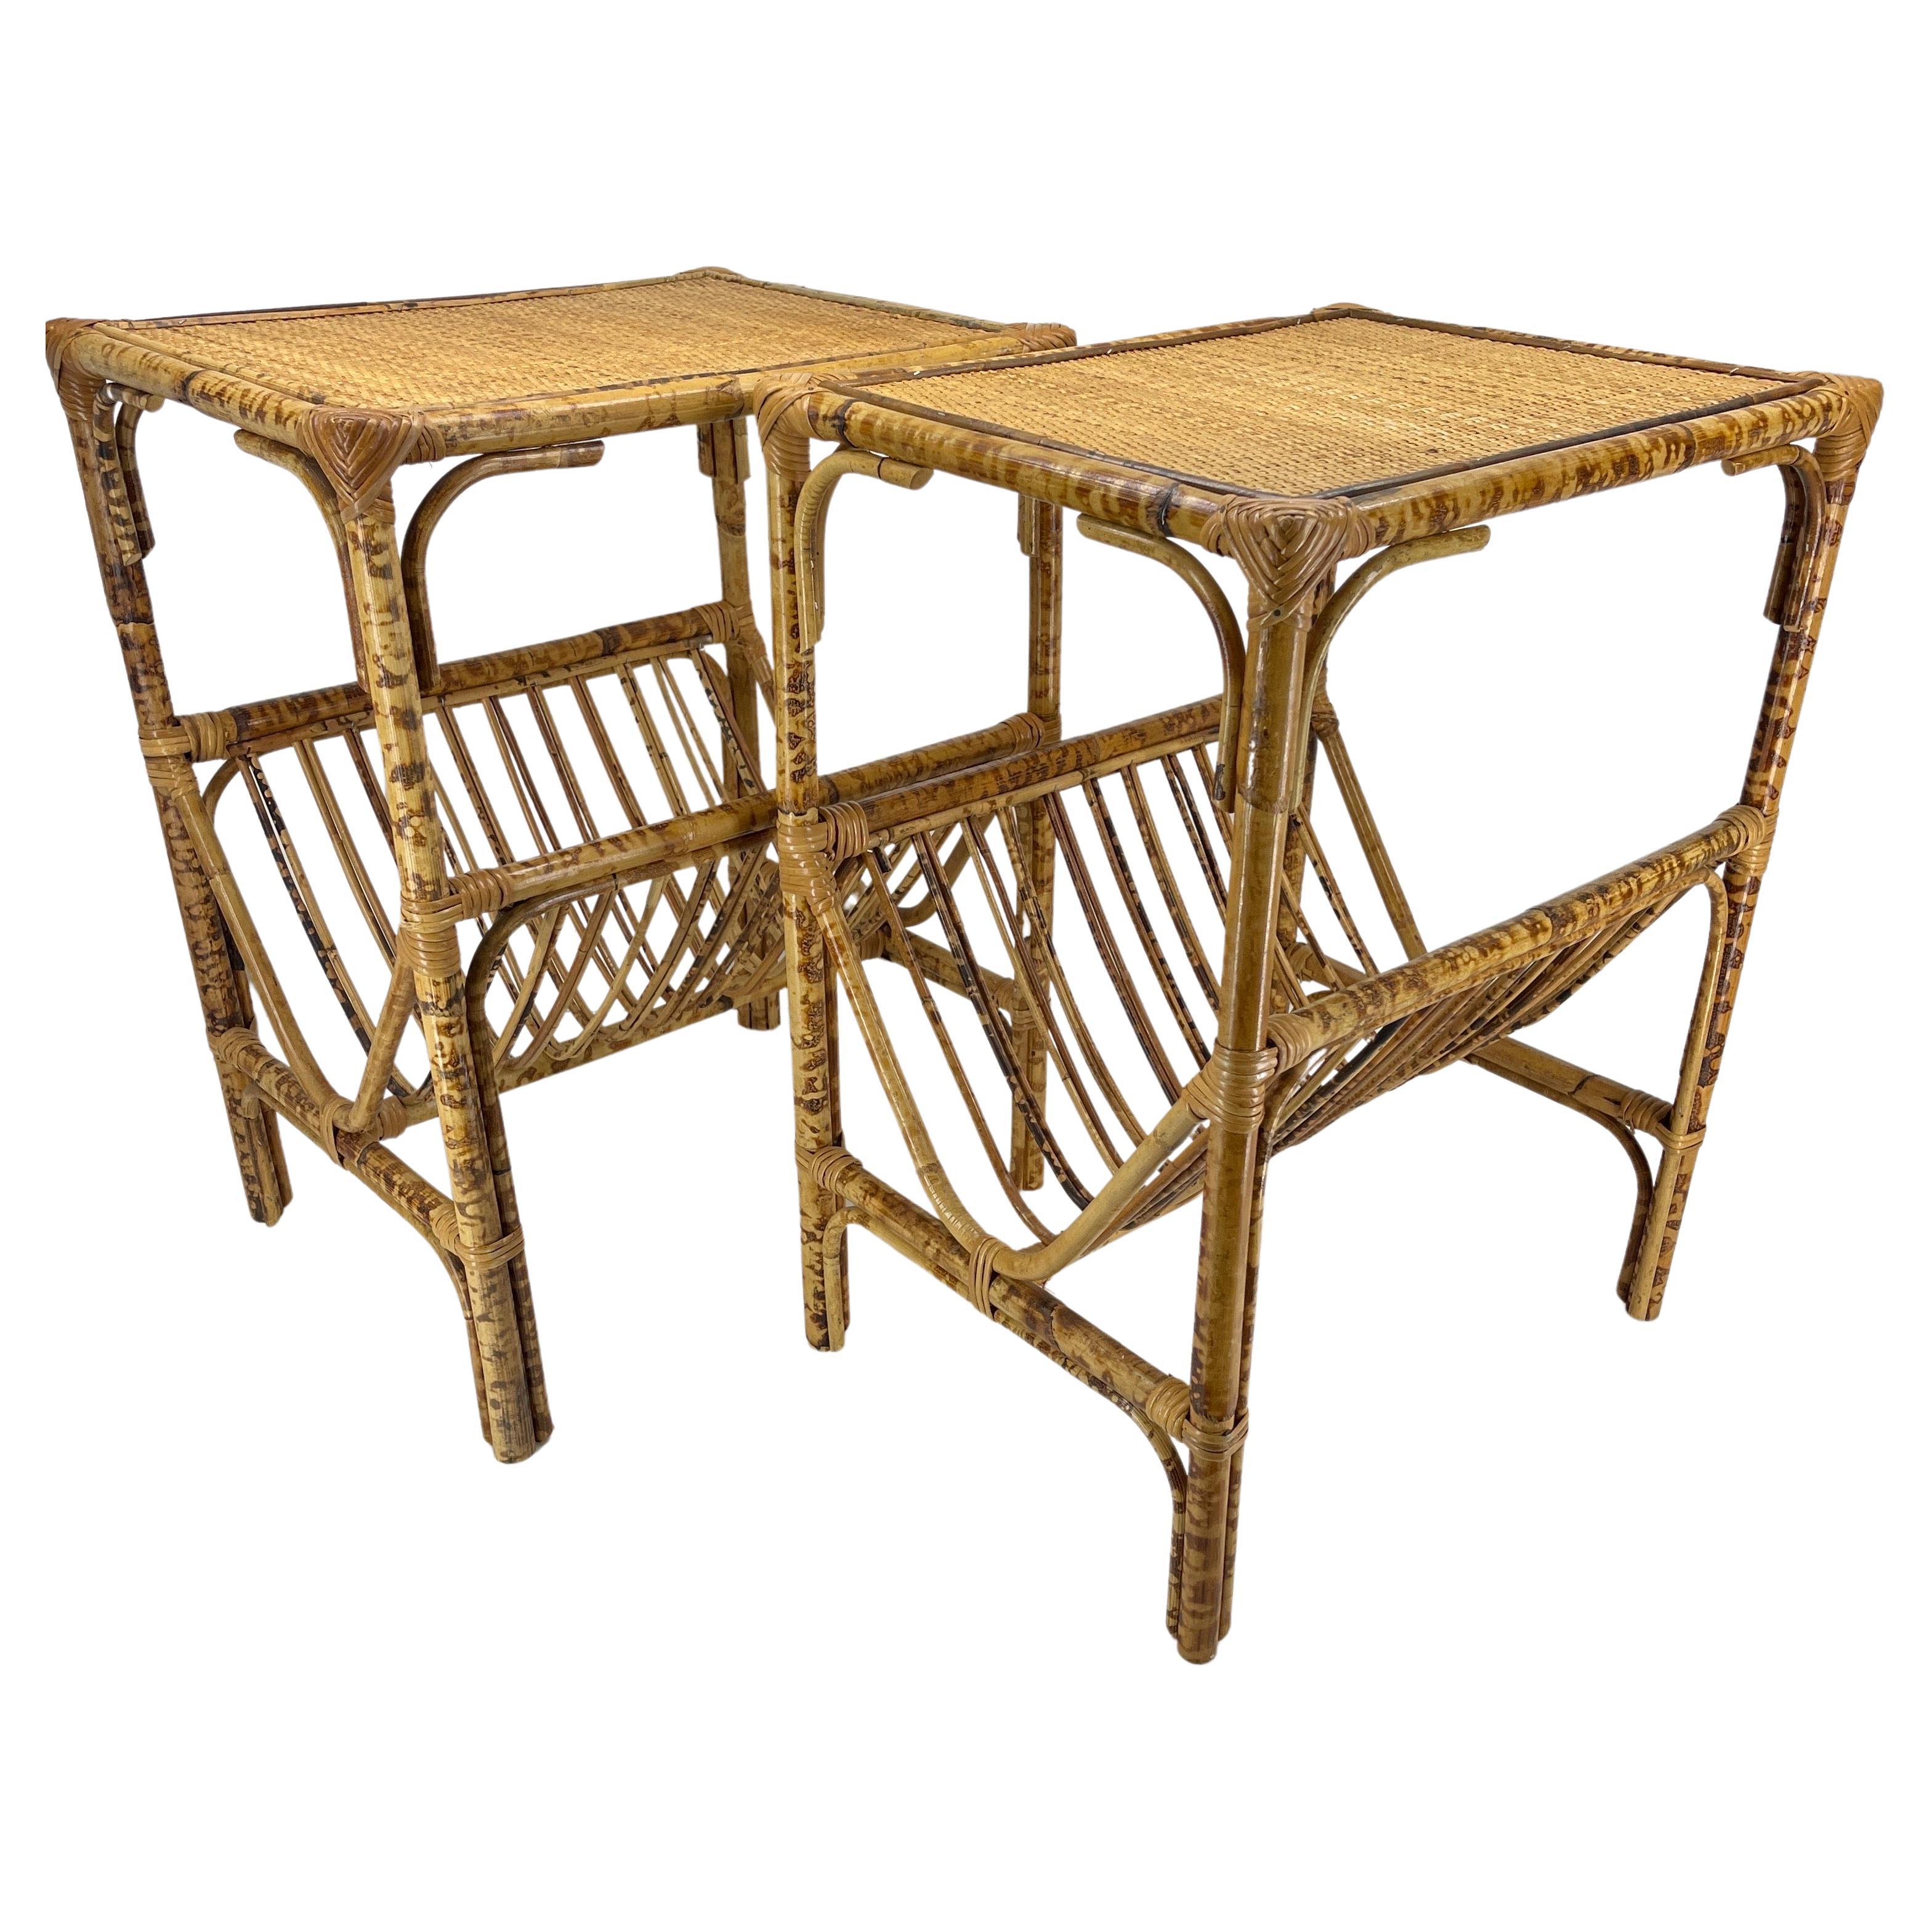 Burnt Bamboo Pair of Decorative Side End Magazine Tables

Classic rectangular side tables offering both form and function. Each woven top end table has two levels, enabling the ability to place objects on top as well as storing books, magazines or